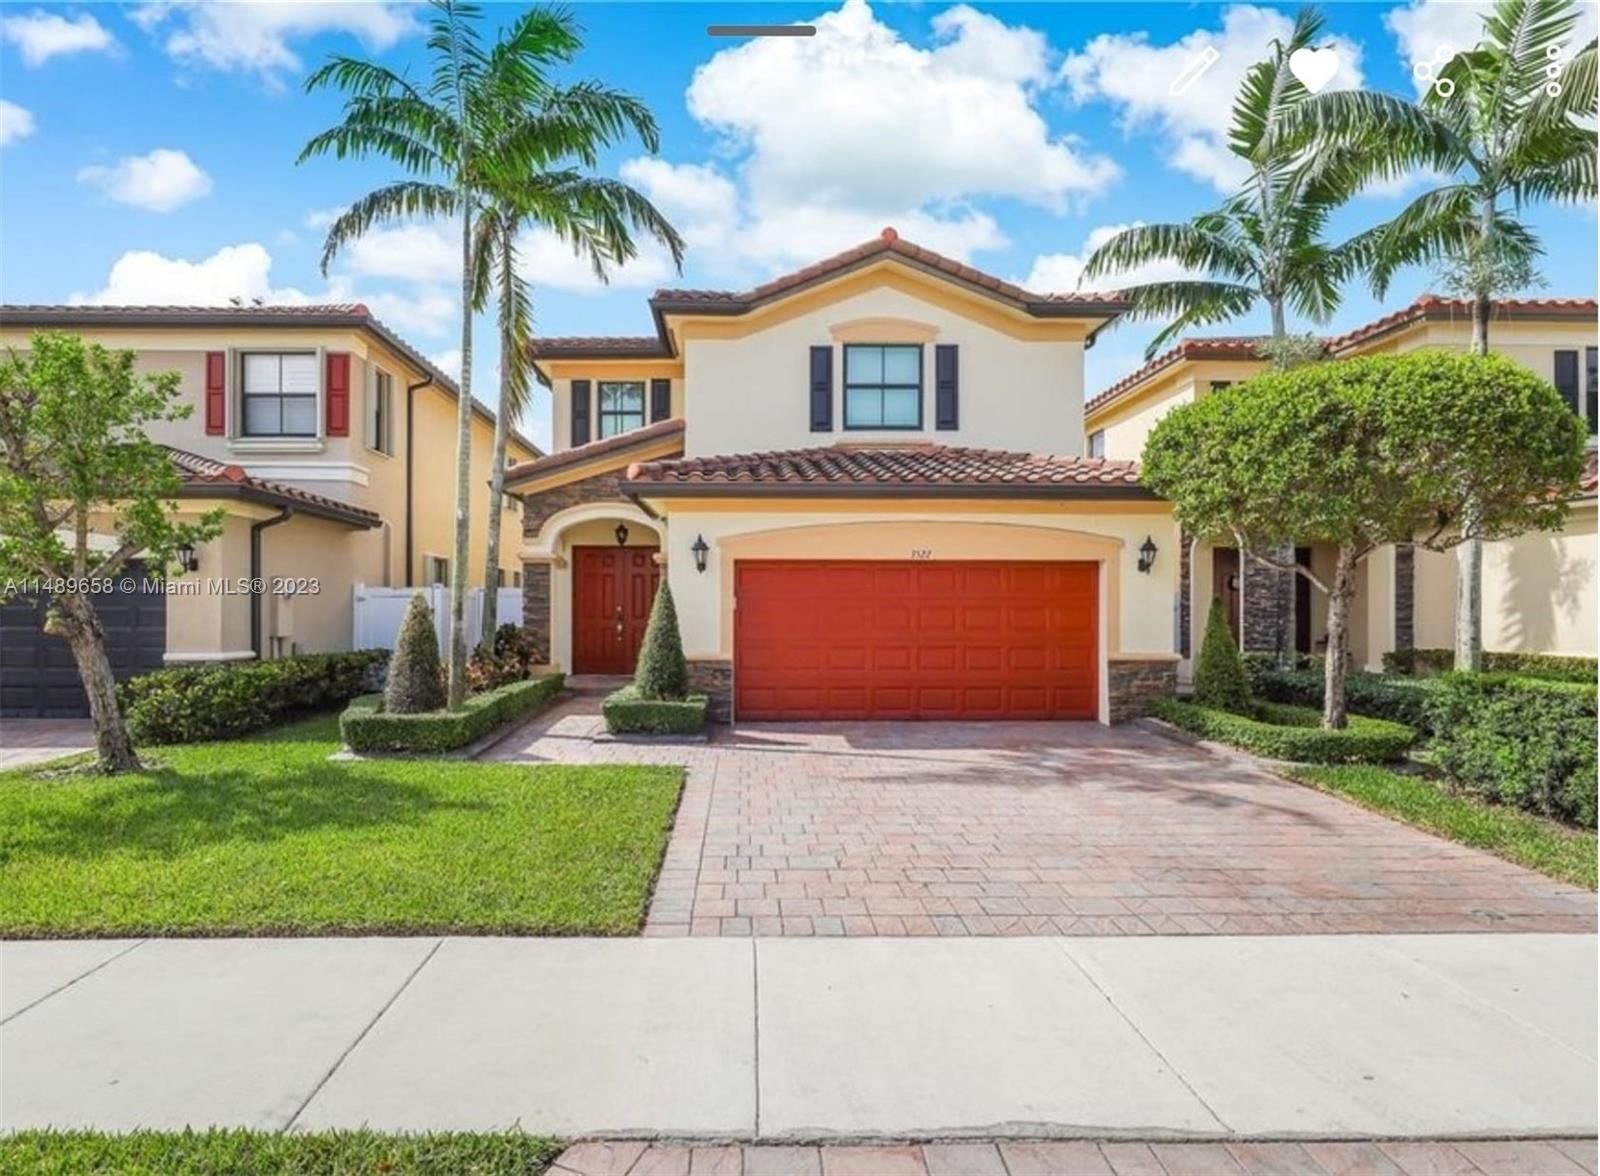 Real estate property located at 3522 88th St, Miami-Dade County, BELLAGIO, Hialeah, FL